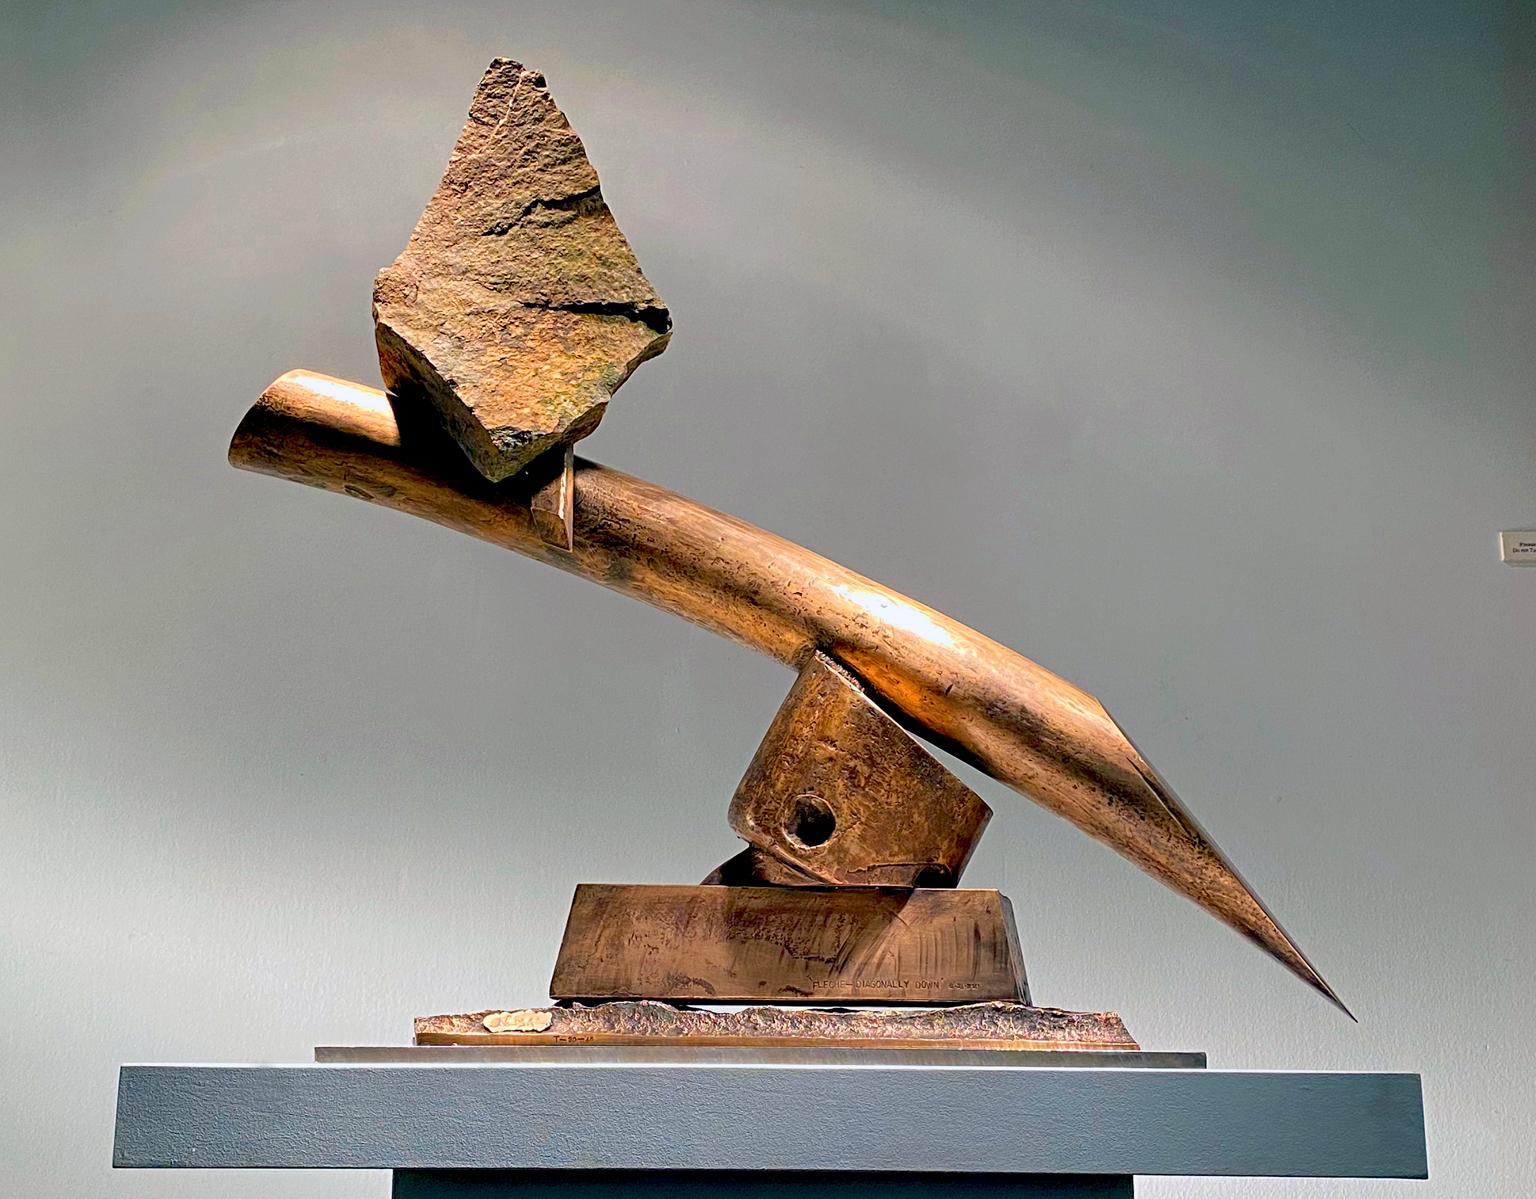 "Fleche (diagonally down)" by John Van Alstine
Granite, bronze, stainless steel

The sculpture of John Van Alstine beautifully, and powerfully, balances the union of stone and metal, while exploring the relationship of the purely natural and the